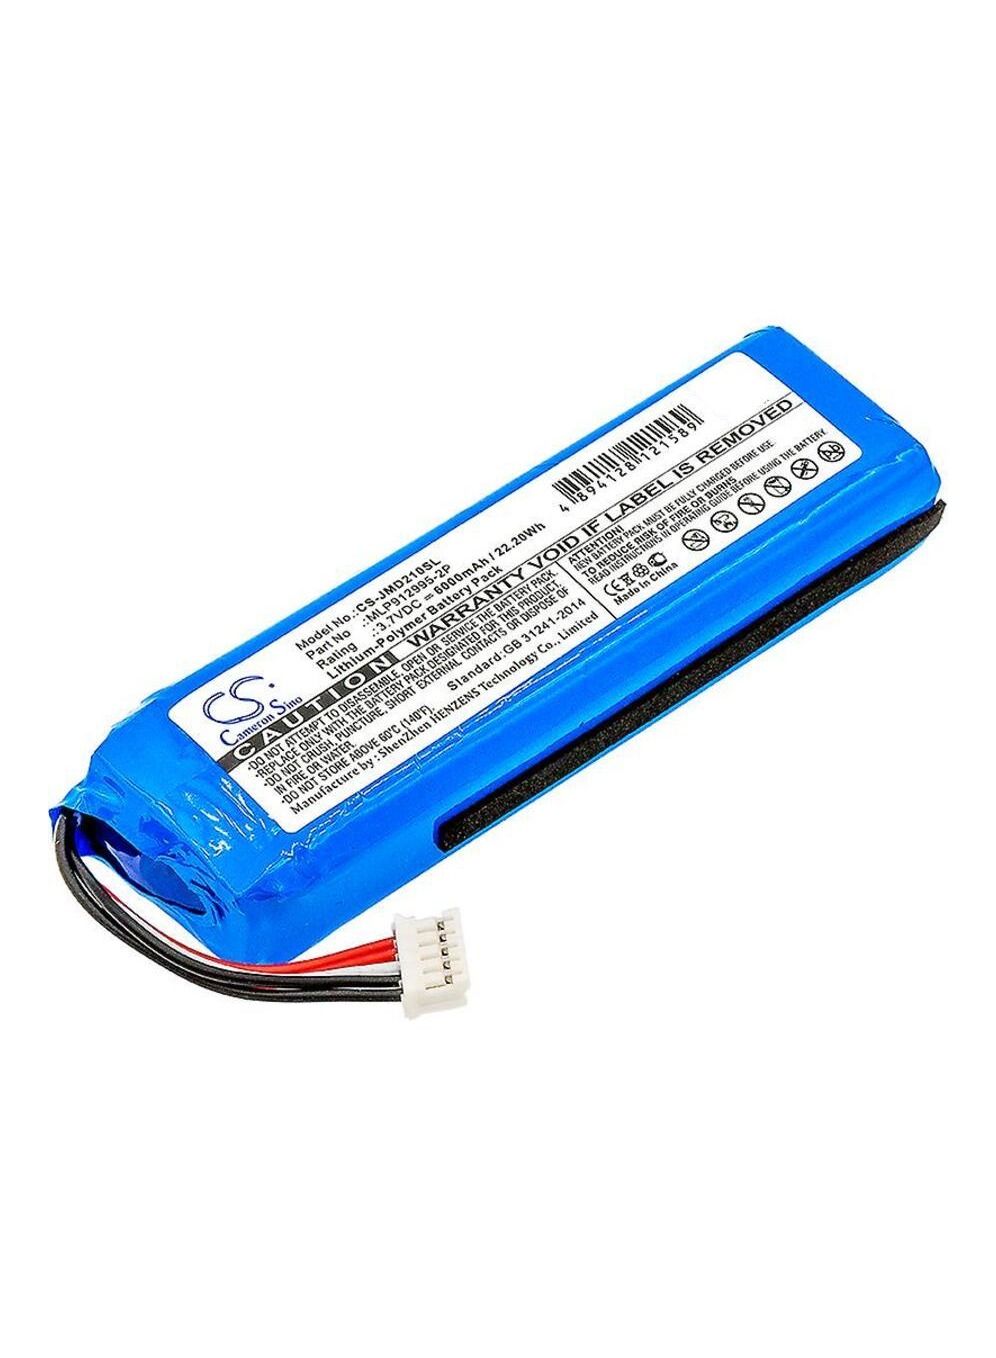 Cameron Sino Battery 6000mAh / 22.20Wh for JBL Charge 2 Plus and Charge 2+ Replacement Part No GSP1029102, MLP912995-2P 